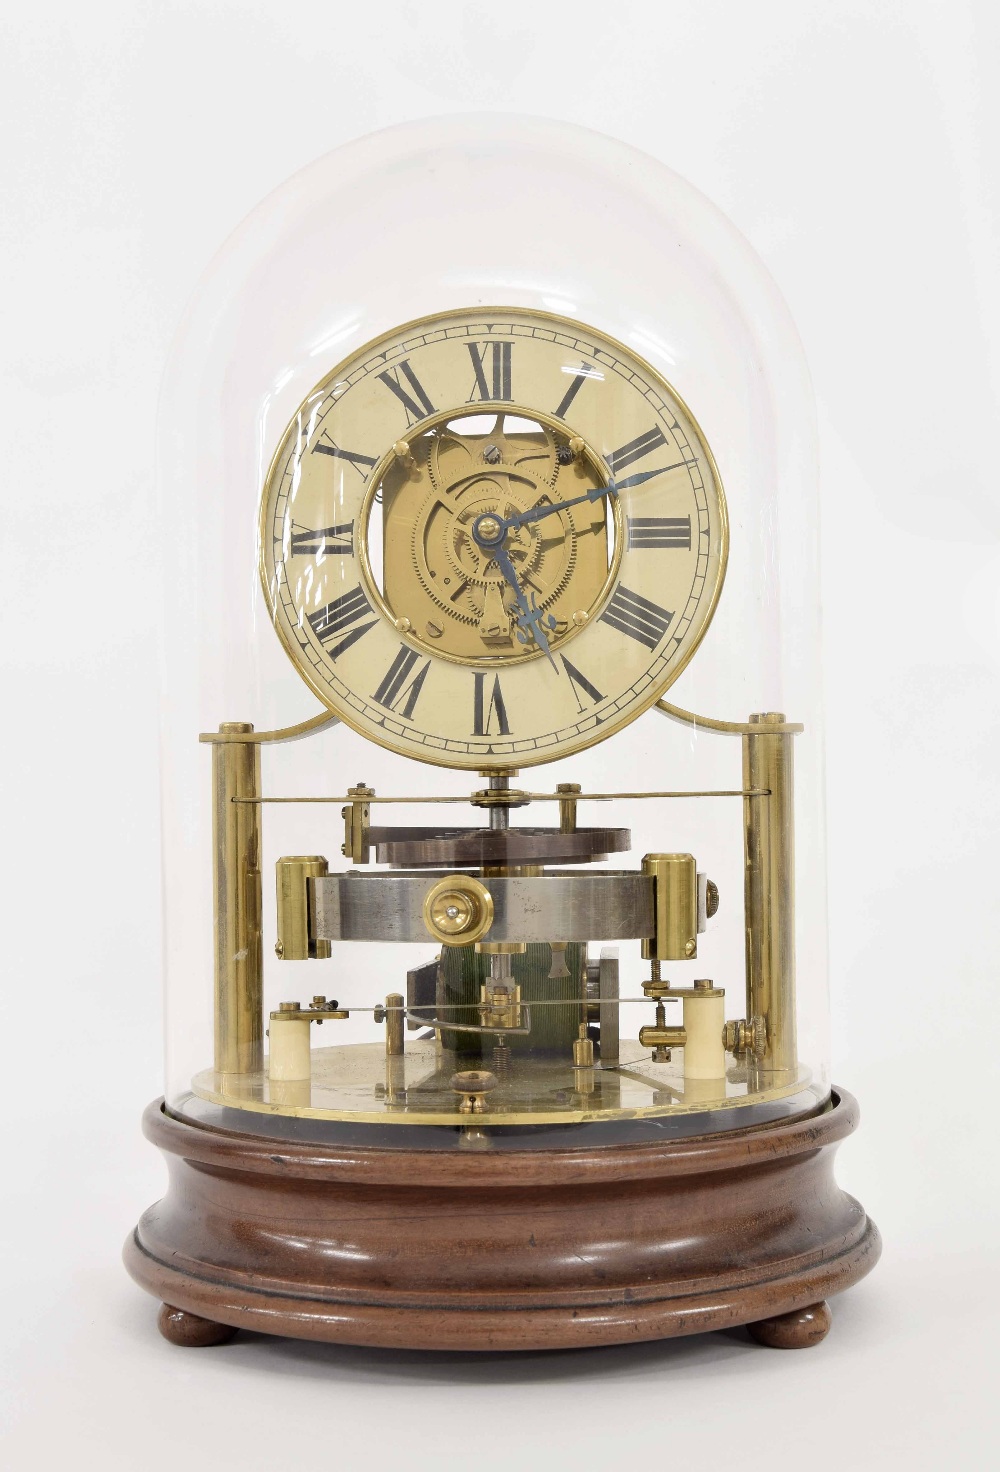 Good rare electric mantel clock by and inscribed Electric Clock Made by the Reason MFG Co. Ltd,